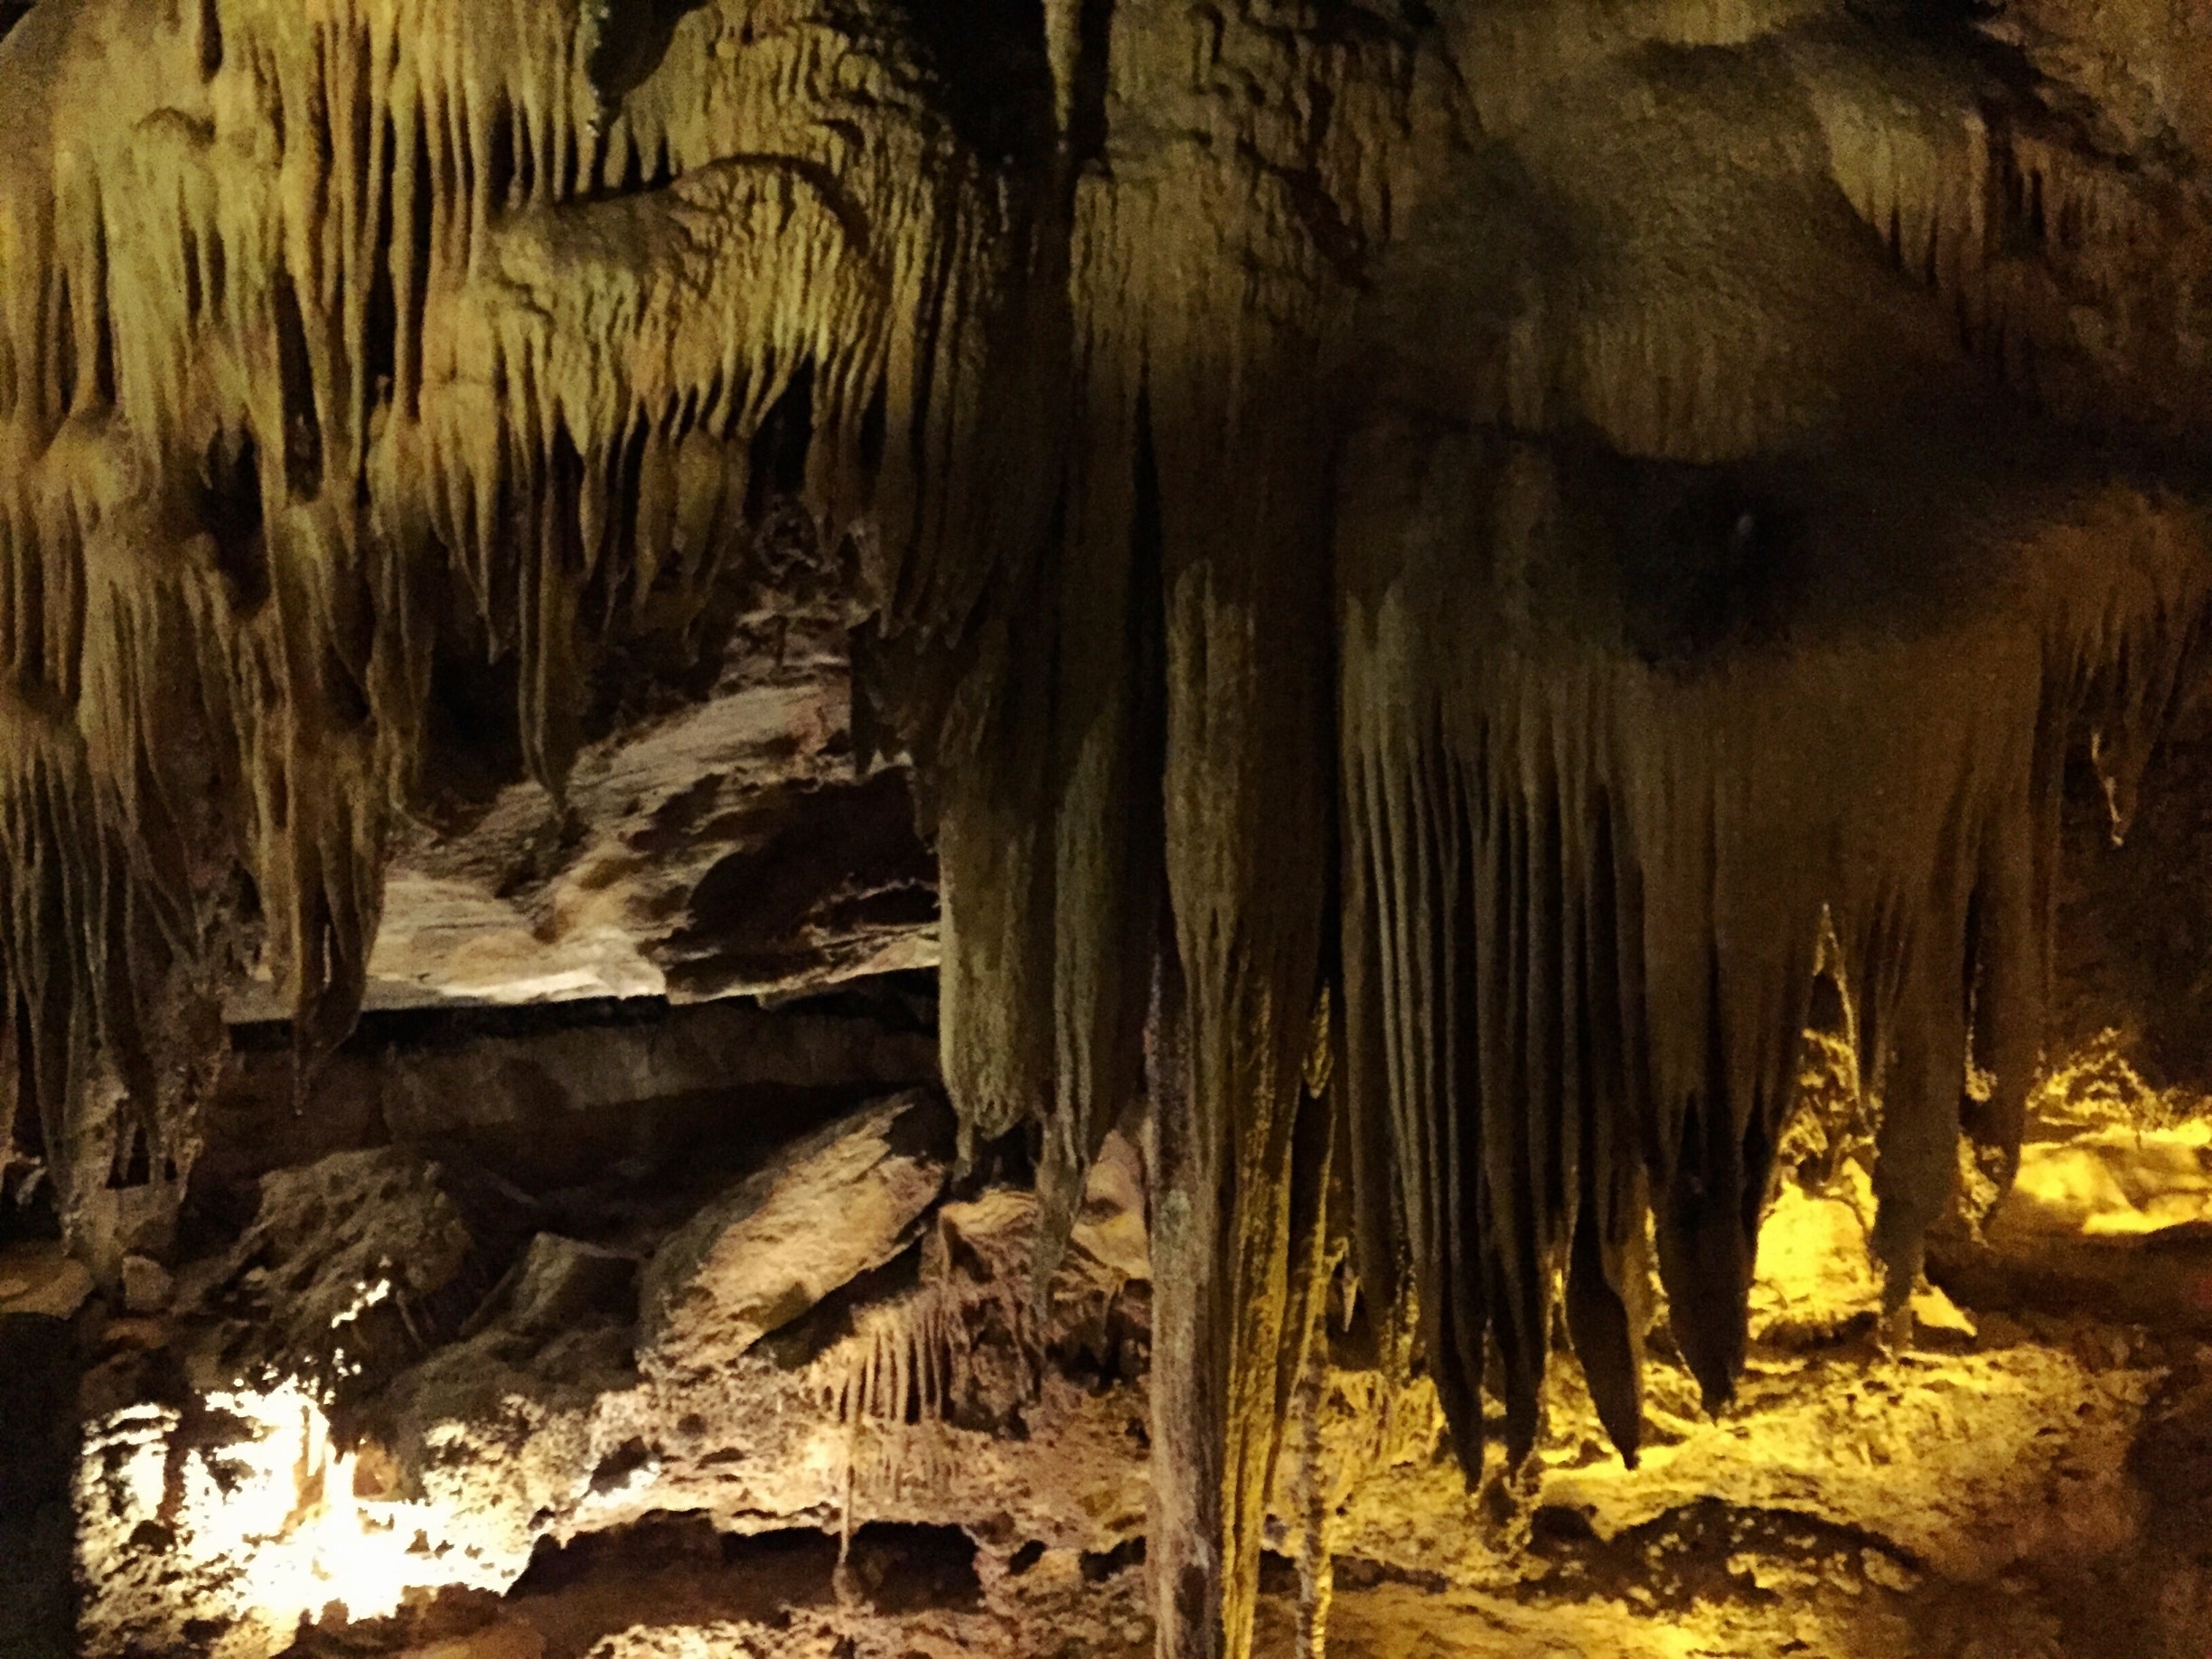 Raccoon Caverns has some amazing rock formations. They offer tours ranging from 45 minutes to 6 hours or more. You can even stay in the caverns overnight!